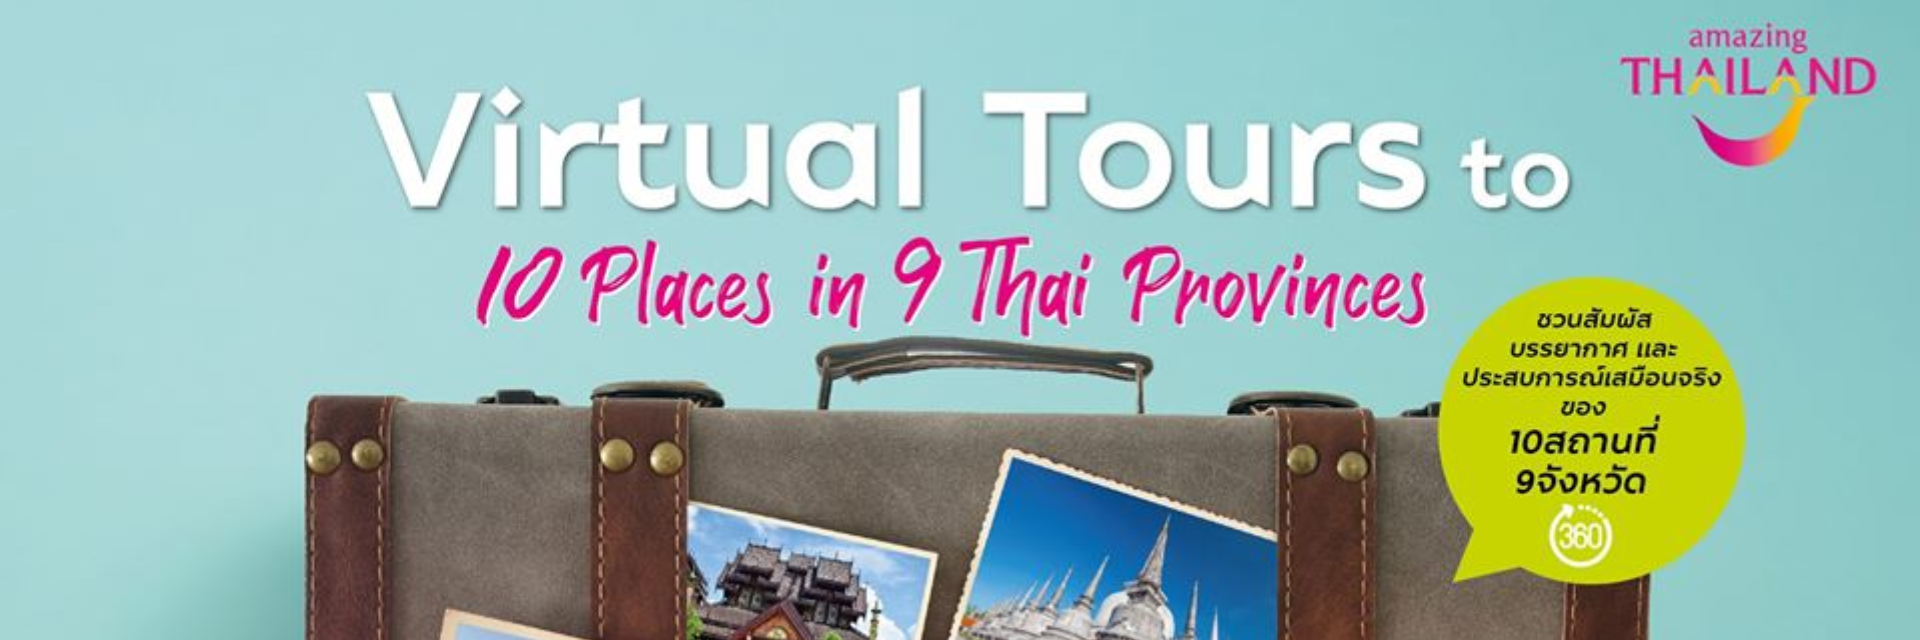 Virtual Tours to 10 Places in 9 Thai Provinces